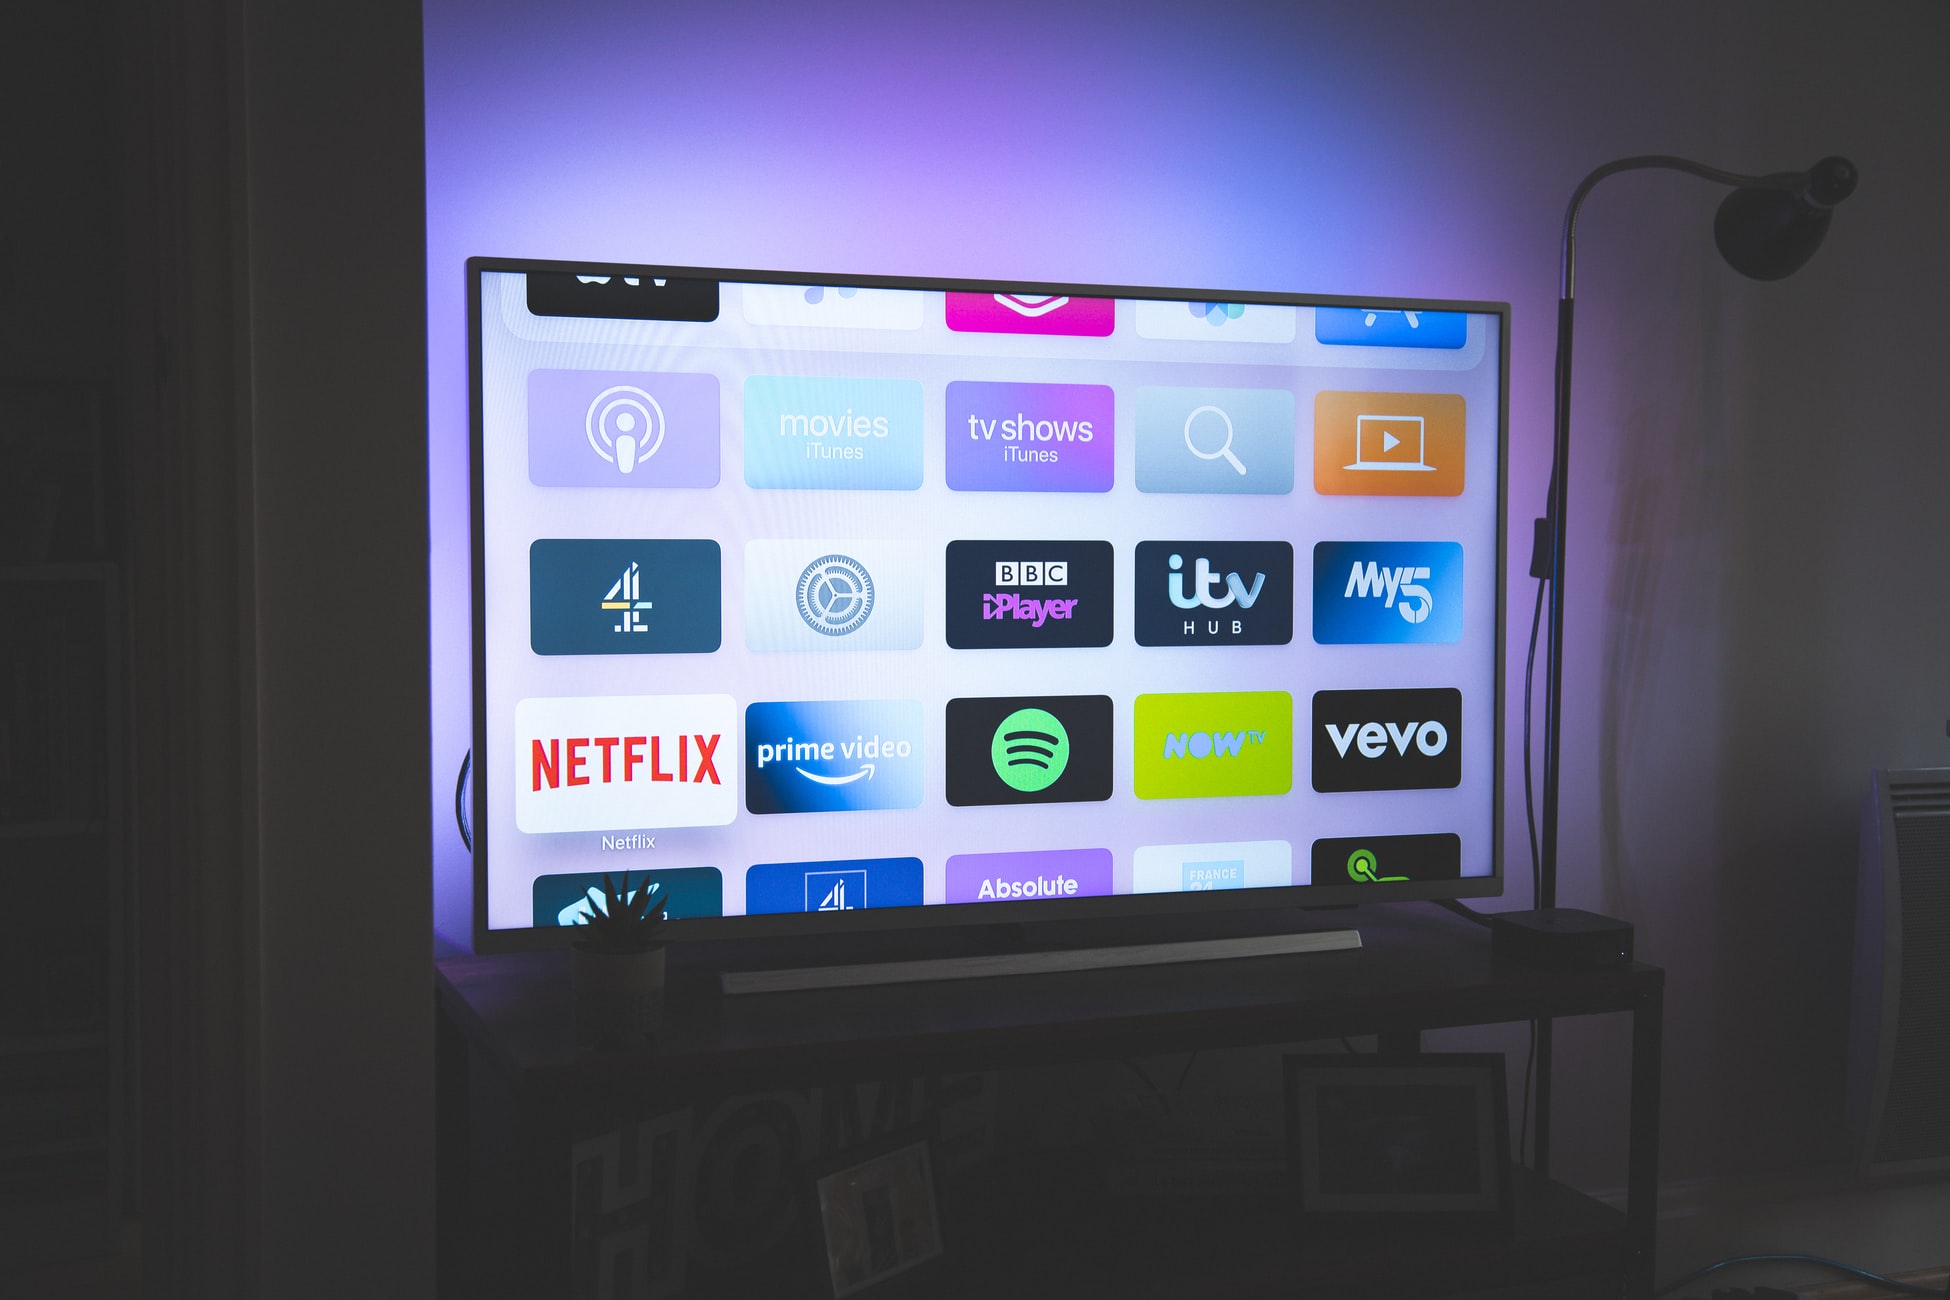 In India, OTT will continue to grow in Popularity